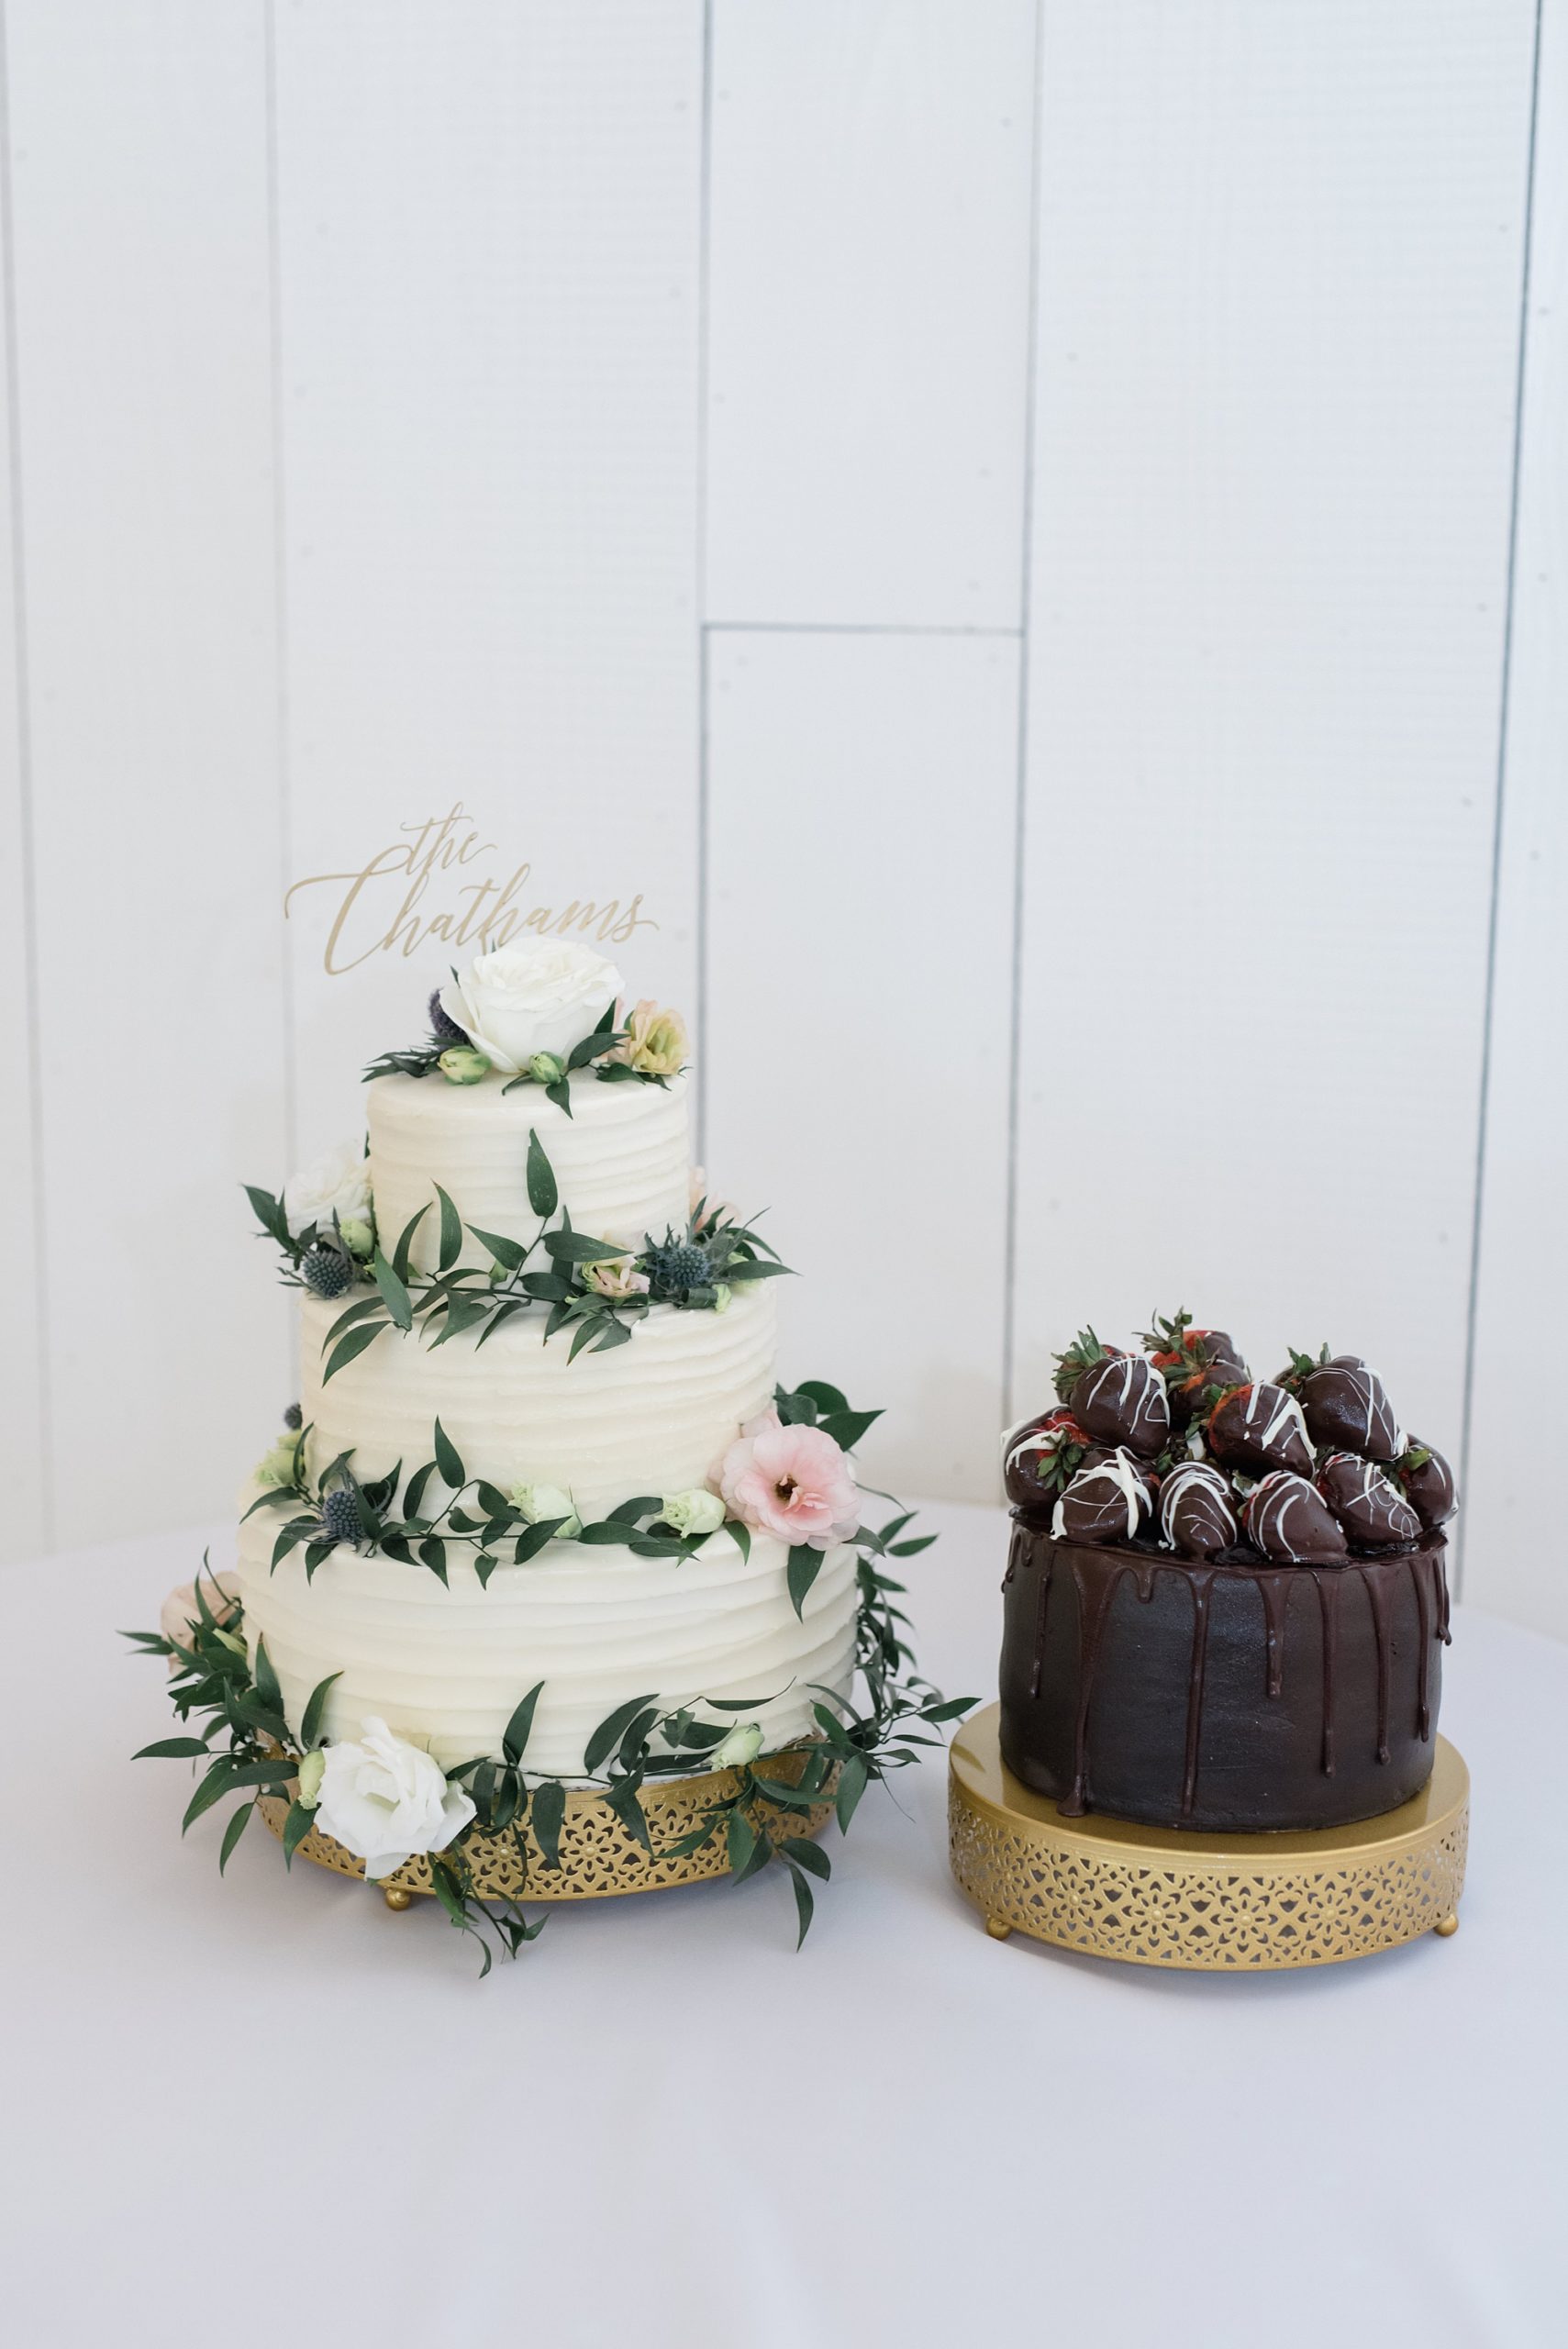 dessert display with two cakes for Texas wedding reception